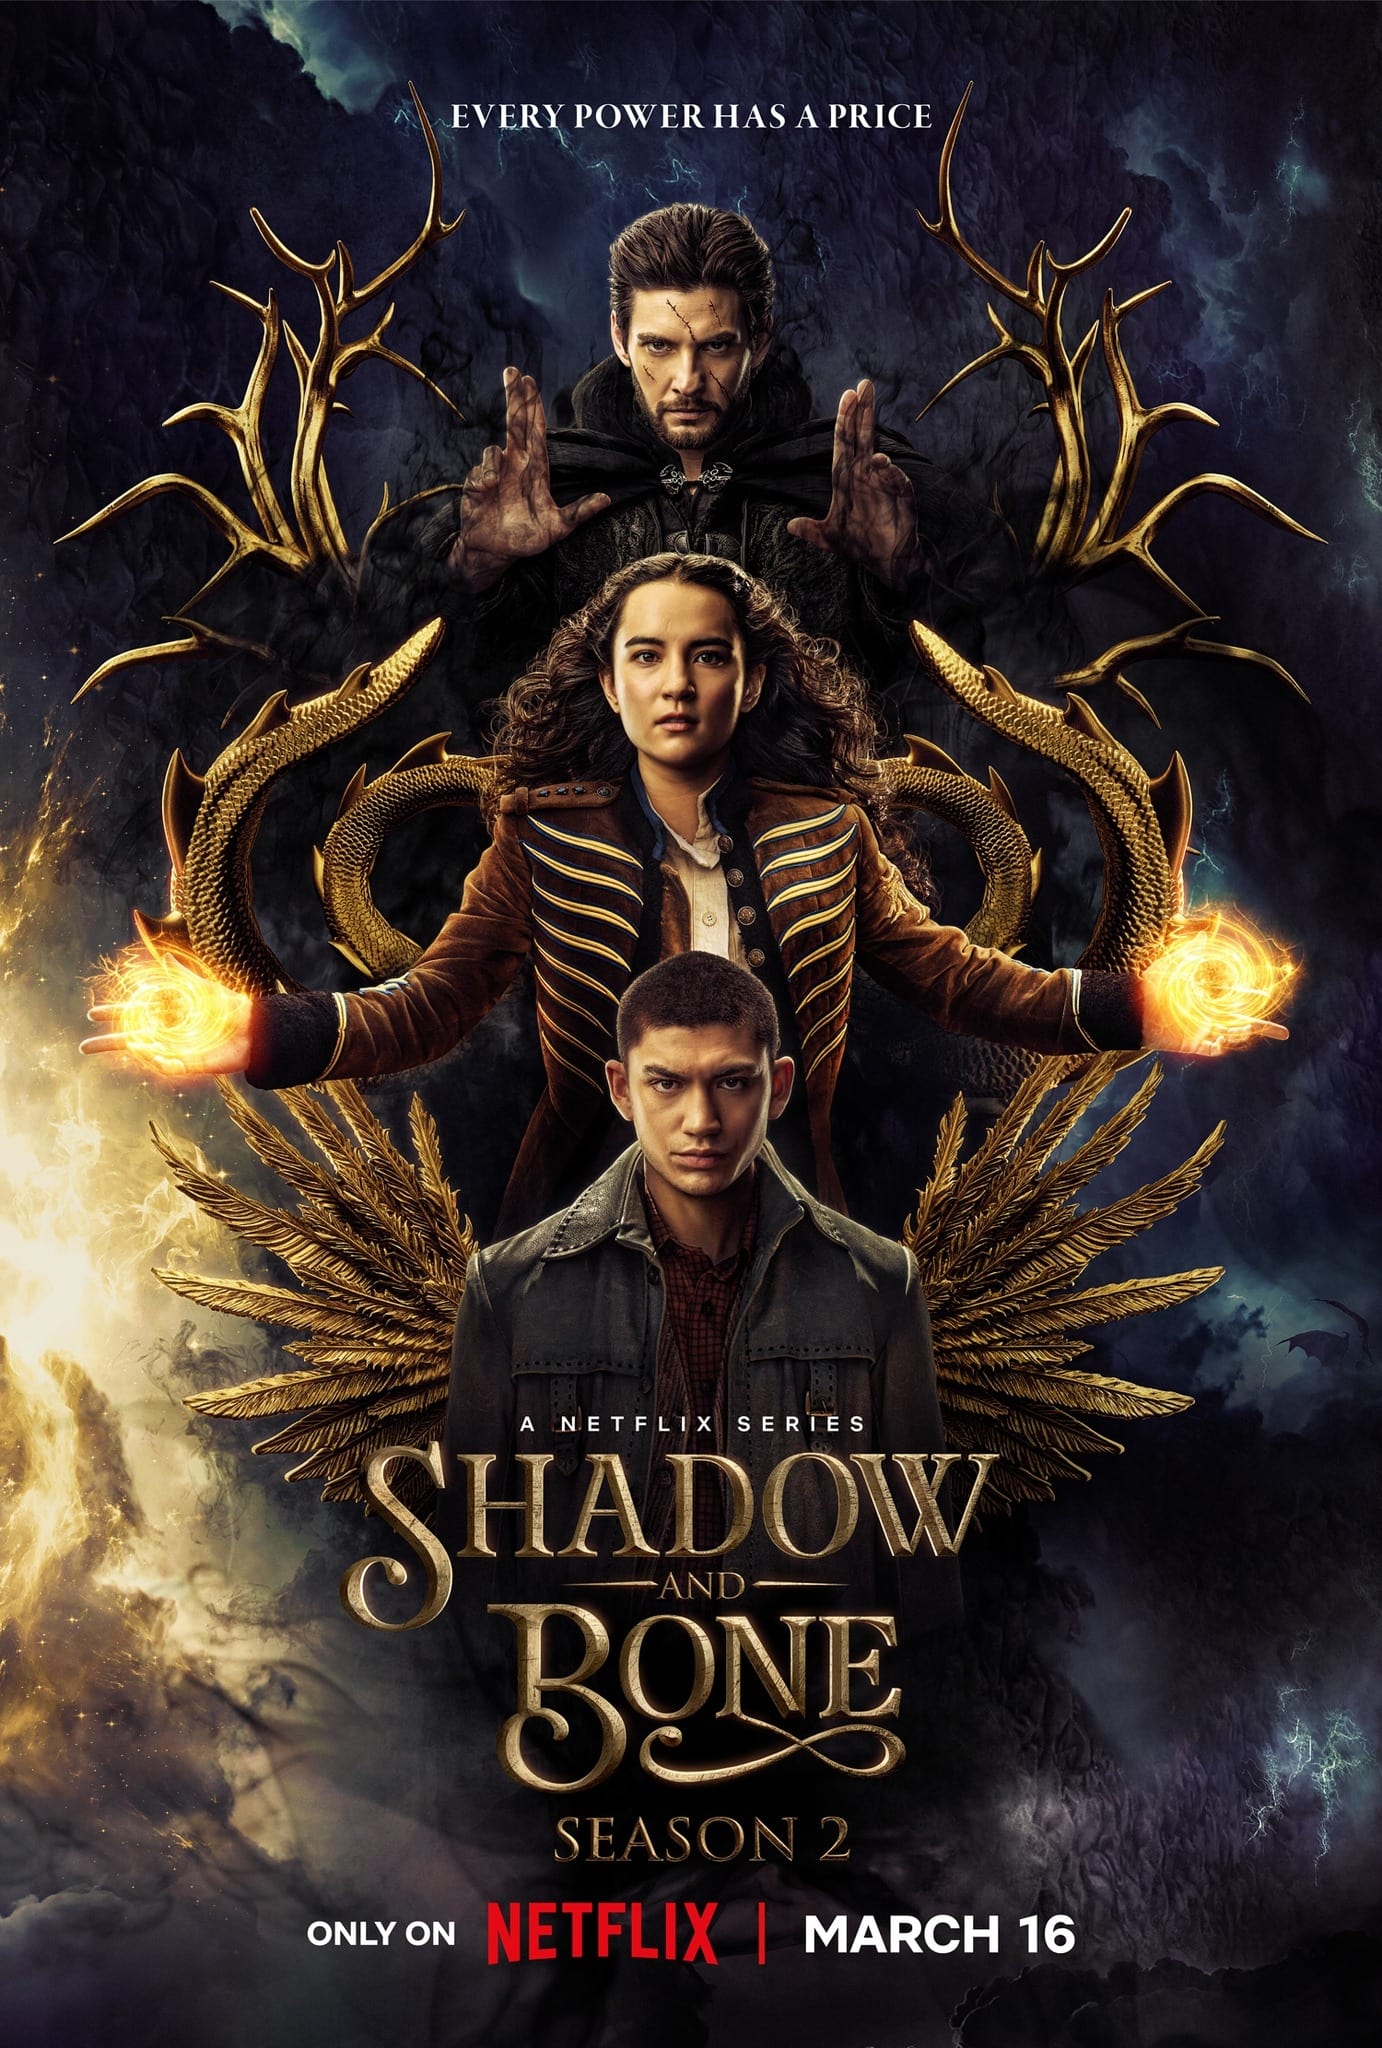 First trailer for new episodes of "Shadow and Bone": Following "The Witcher" setback, Netflix is placing its confidence in this series